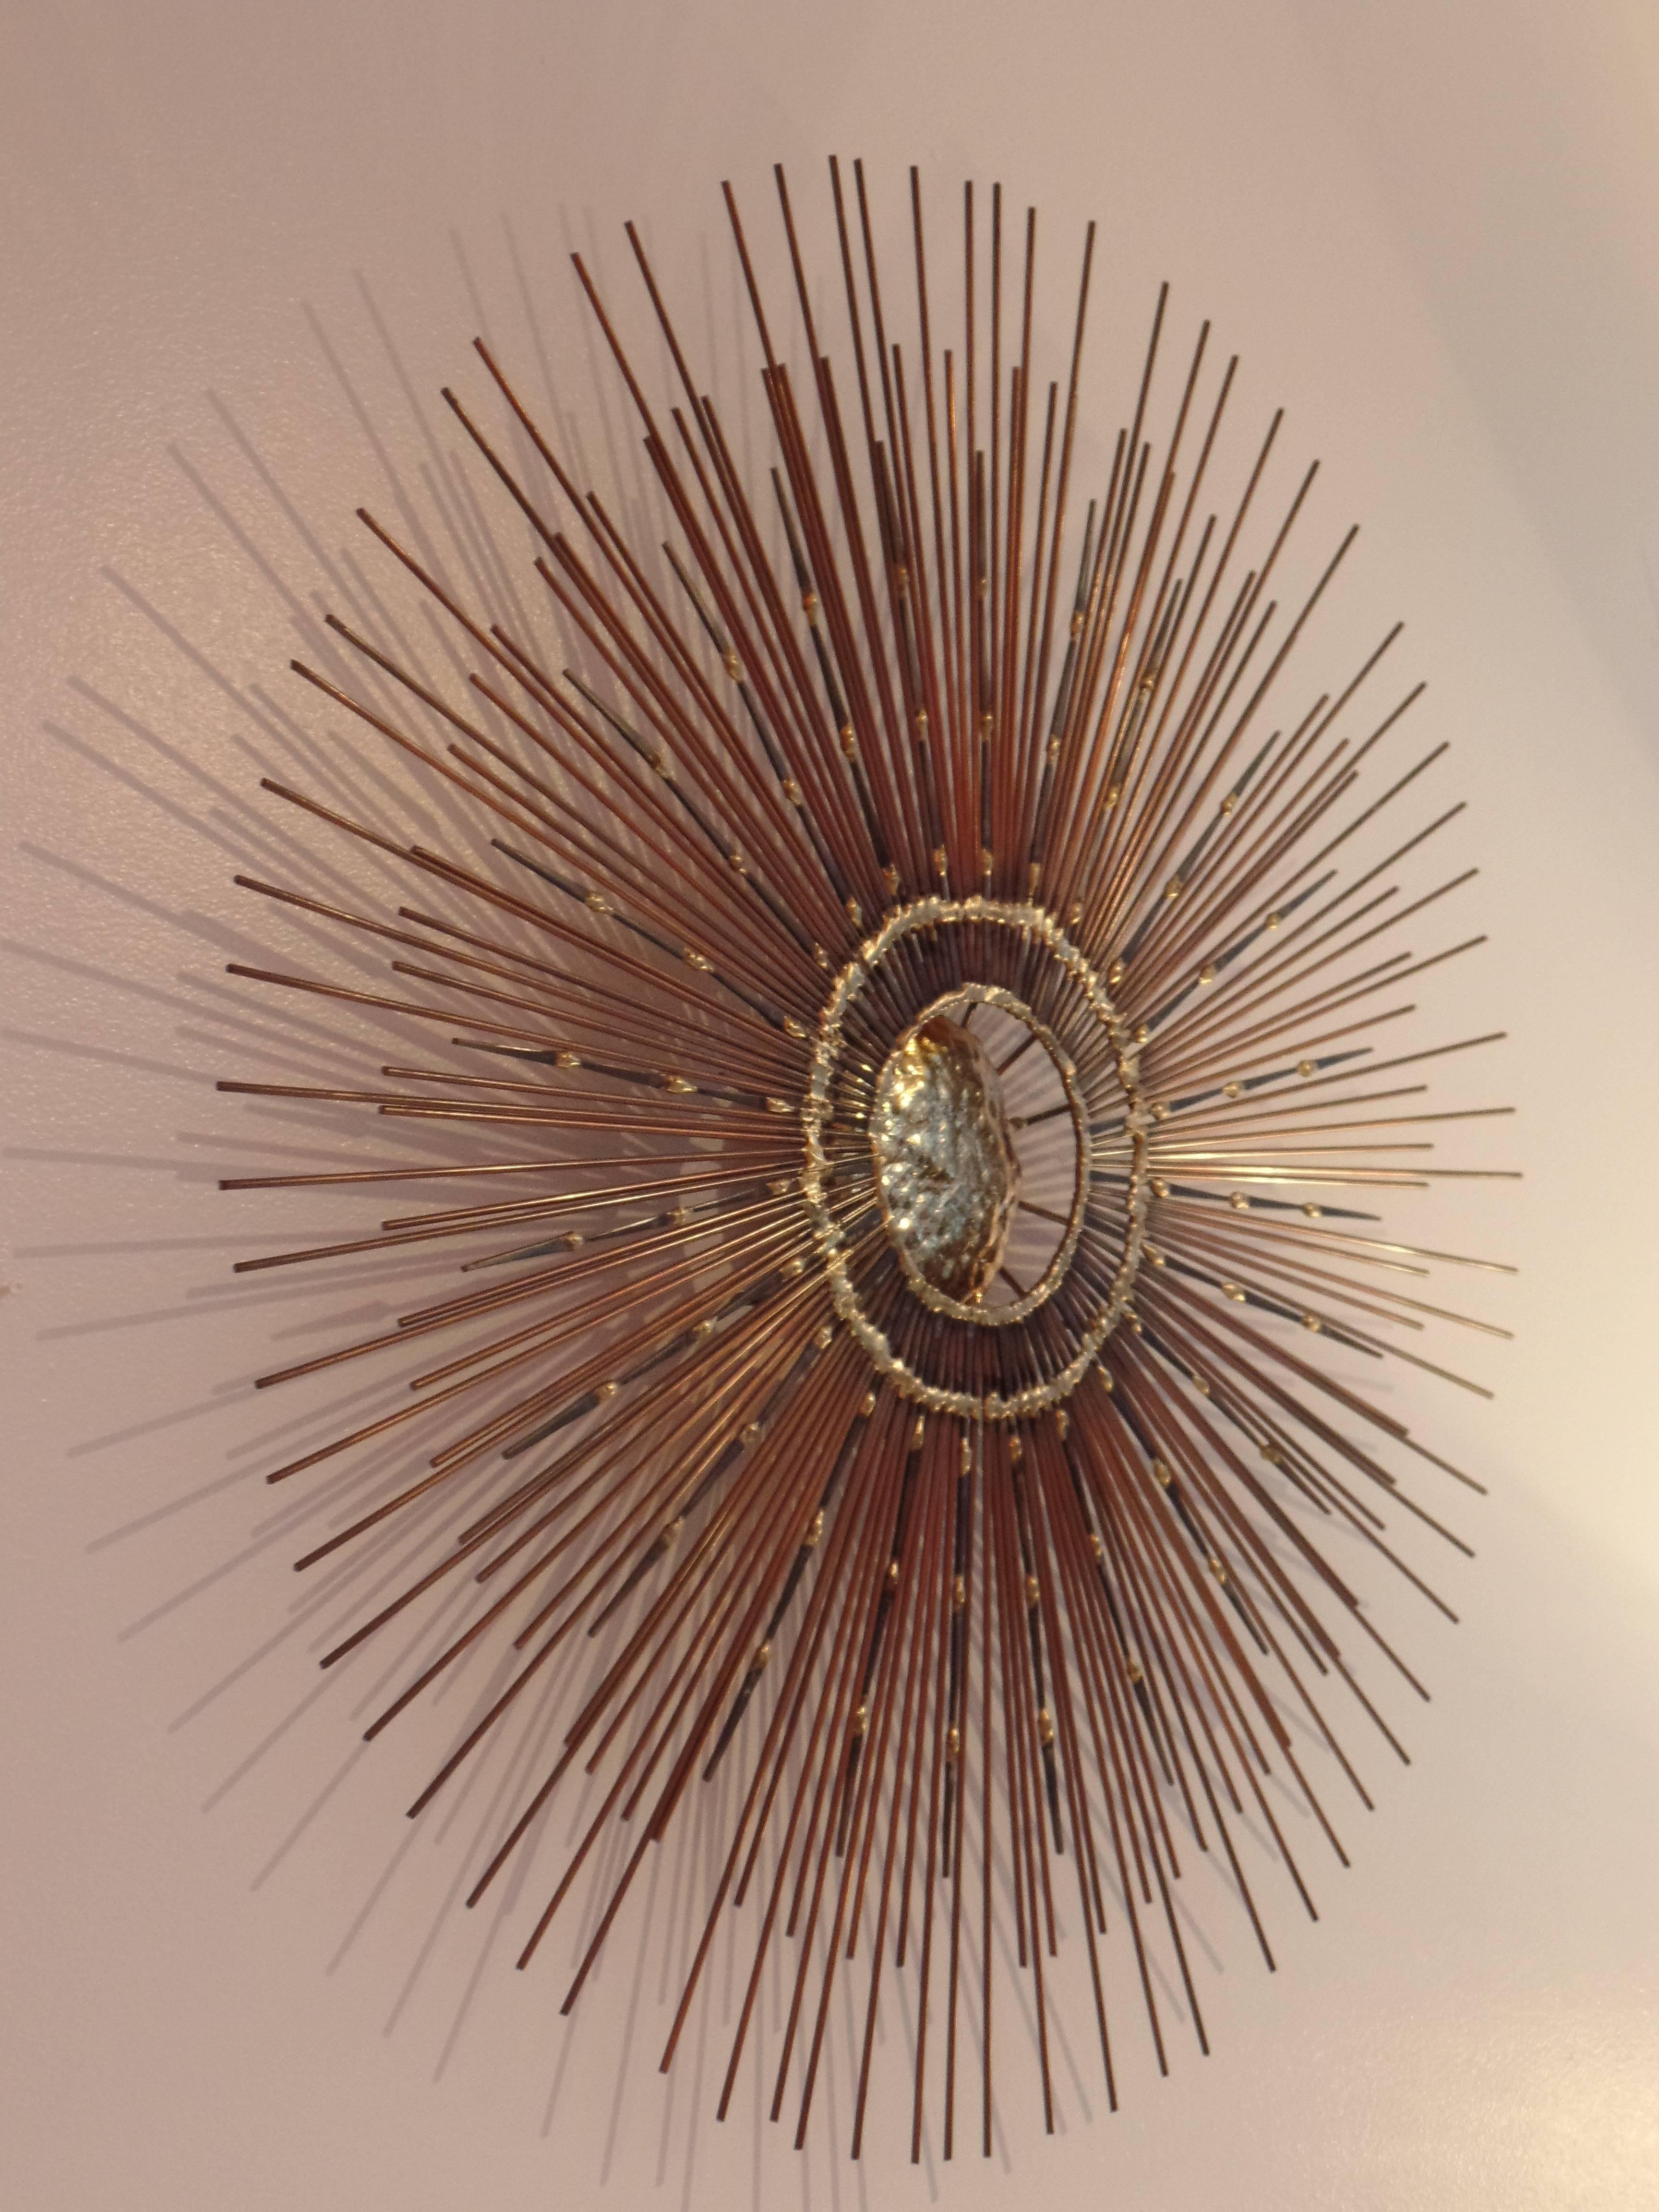 Elegant Mid-Century wall mirror in modern neoclassical spirit by French Canadian artist, BELA. 

The wall mounted sculpture/mirror features a stunning structure composed of a rare combination of polished brass and alternating steel and copper rods.